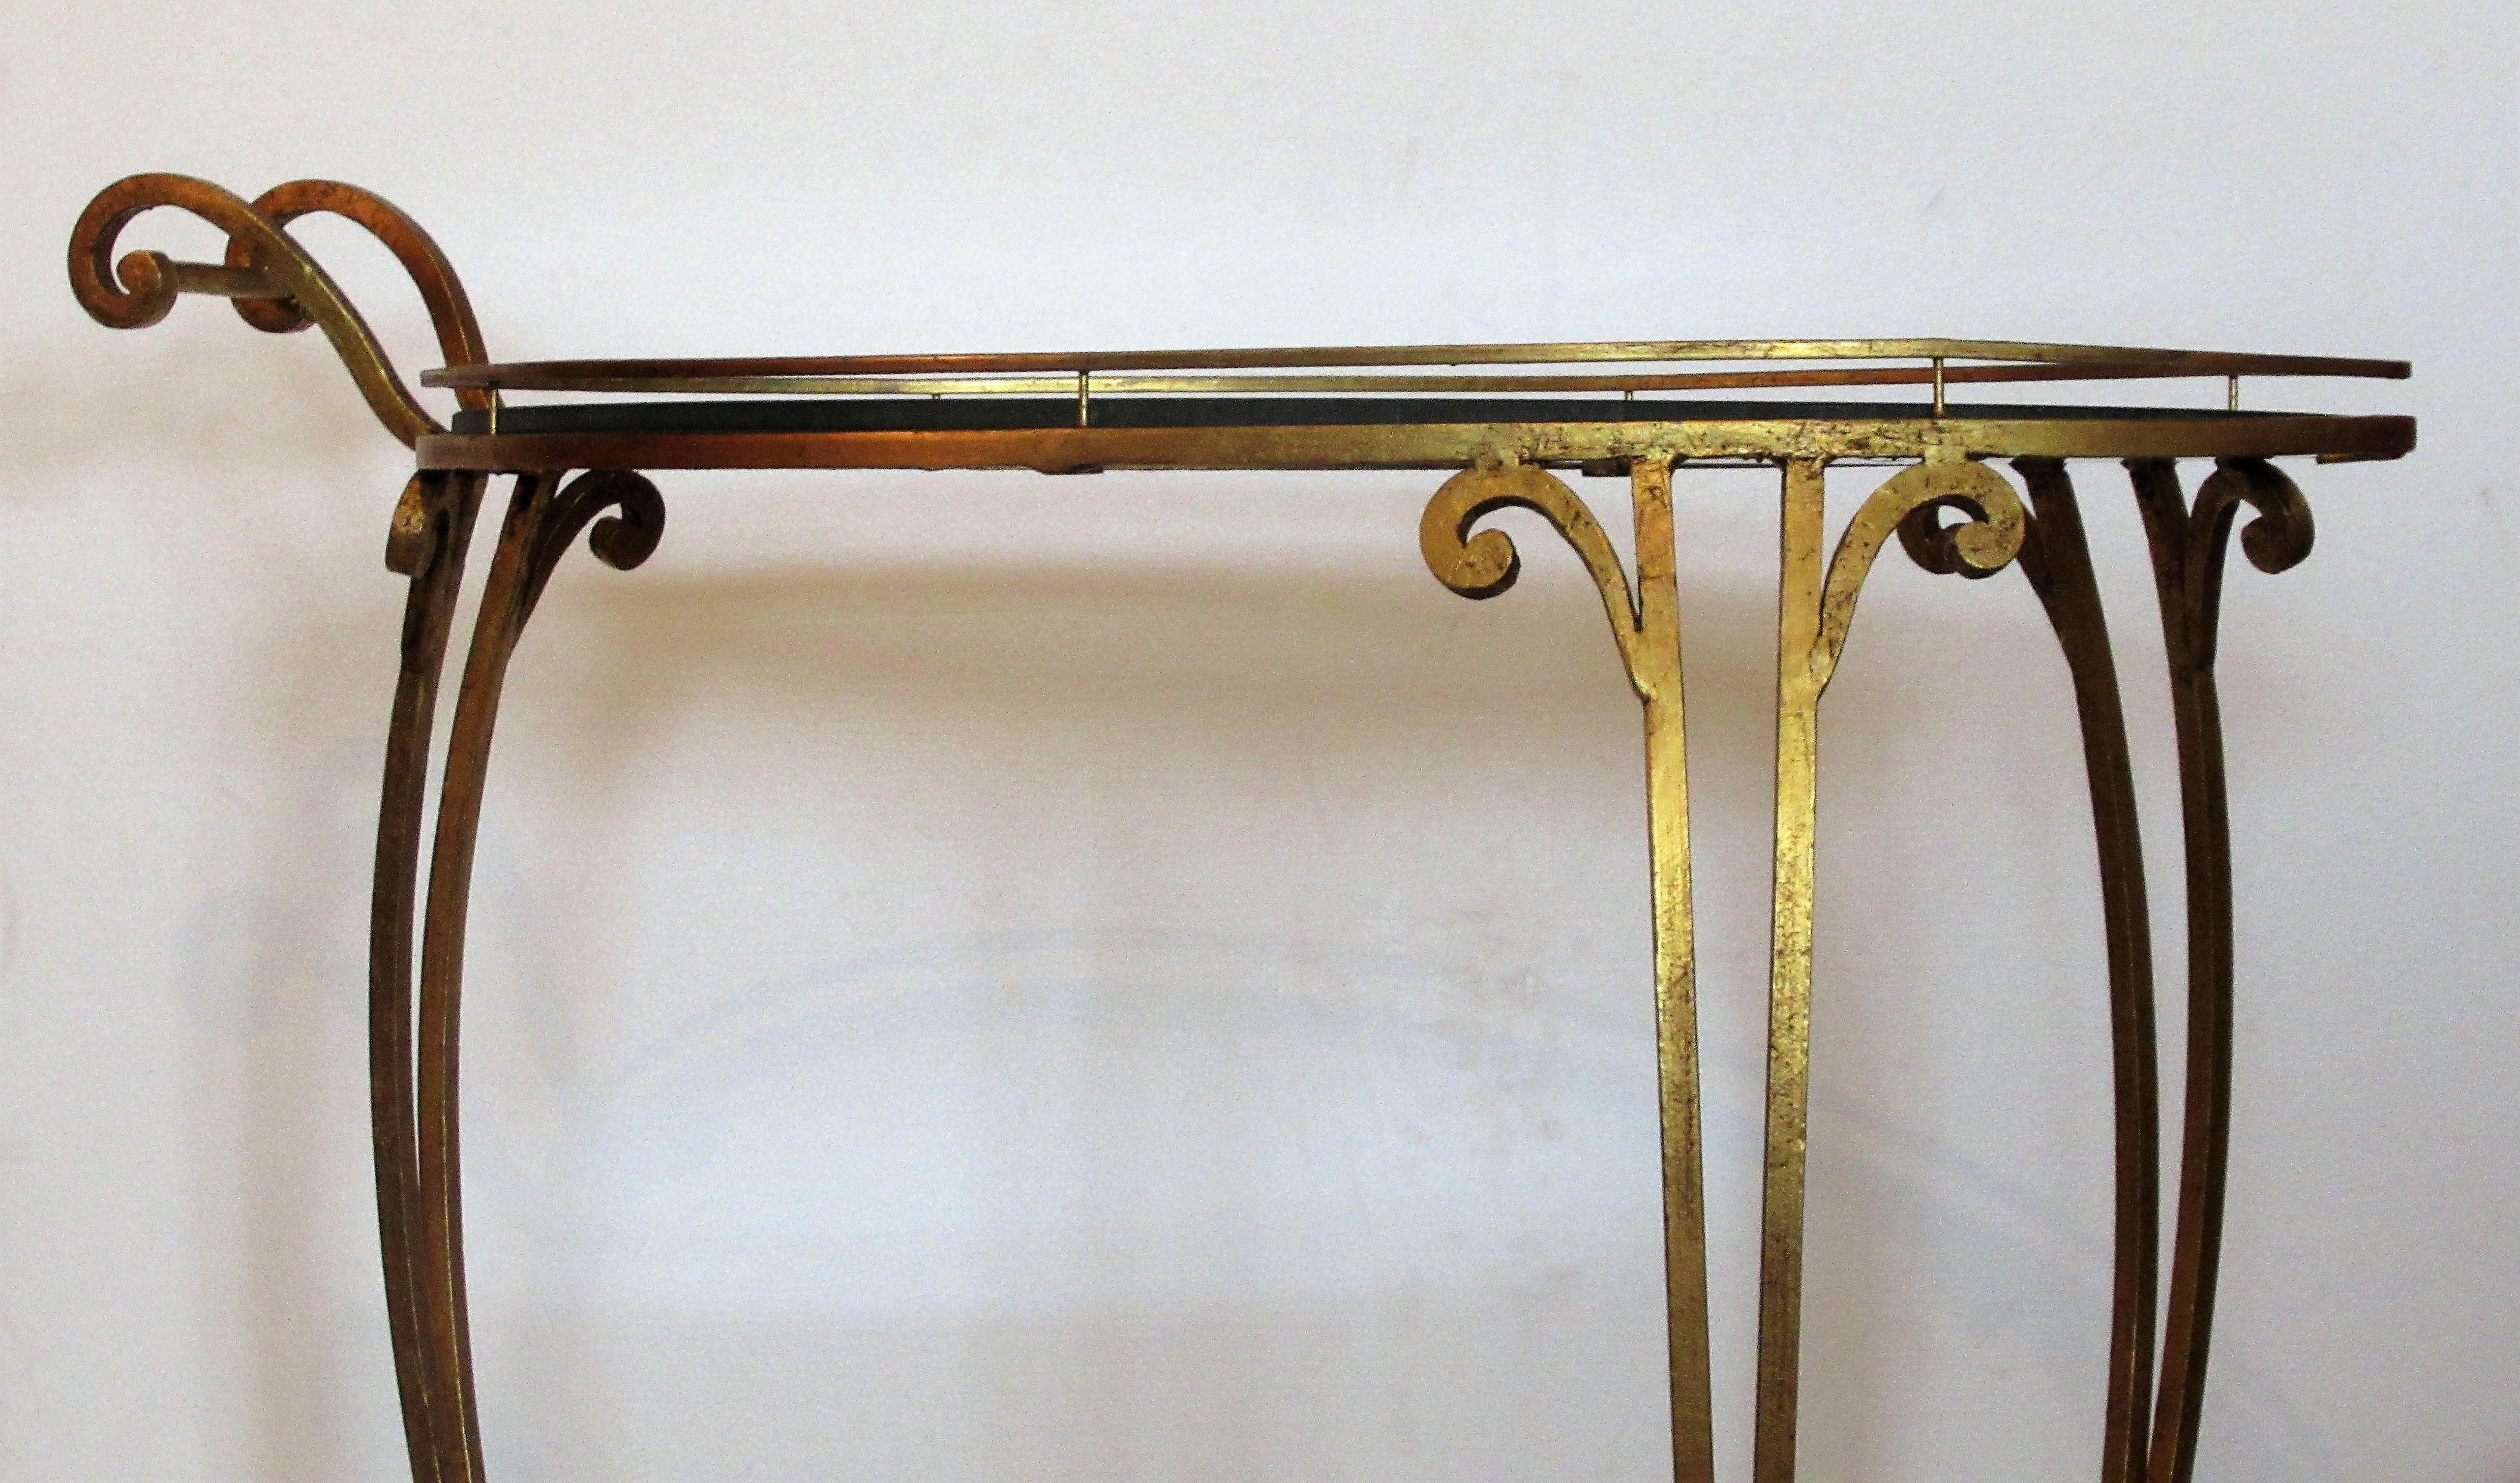 1960s Italian gilt iron rolling bar serving cart with three casters and removable upper and lower oval plate glass shelves (12 inches high to top of lower glass shelf / 30 inches high to top of upper glass shelf) The original gilding in beautifully